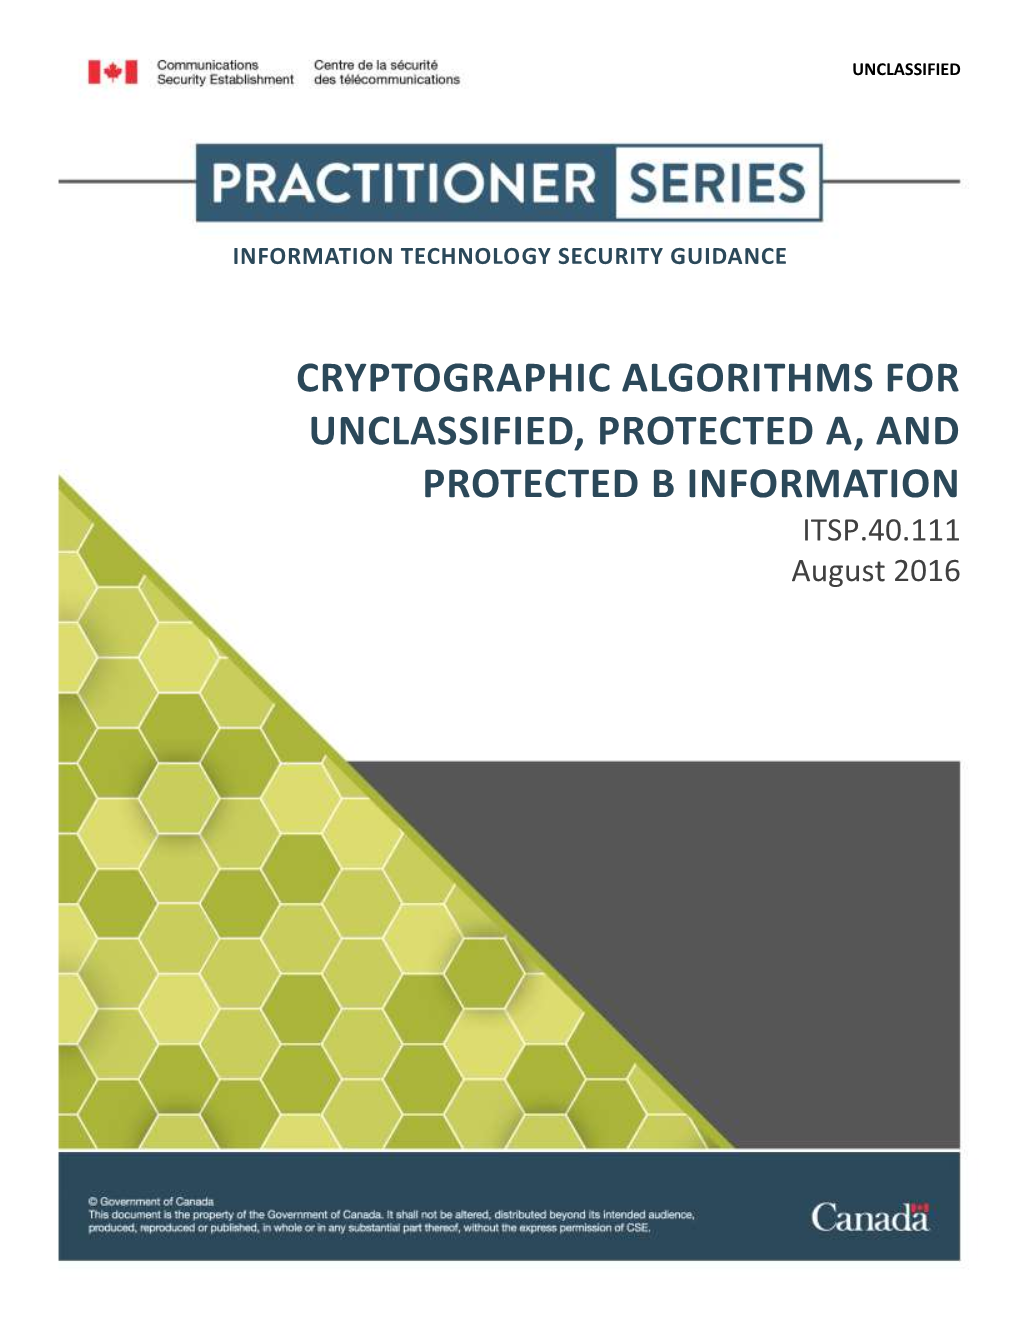 CRYPTOGRAPHIC ALGORITHMS for UNCLASSIFIED, PROTECTED A, and PROTECTED B INFORMATION ITSP.40.111 August 2016